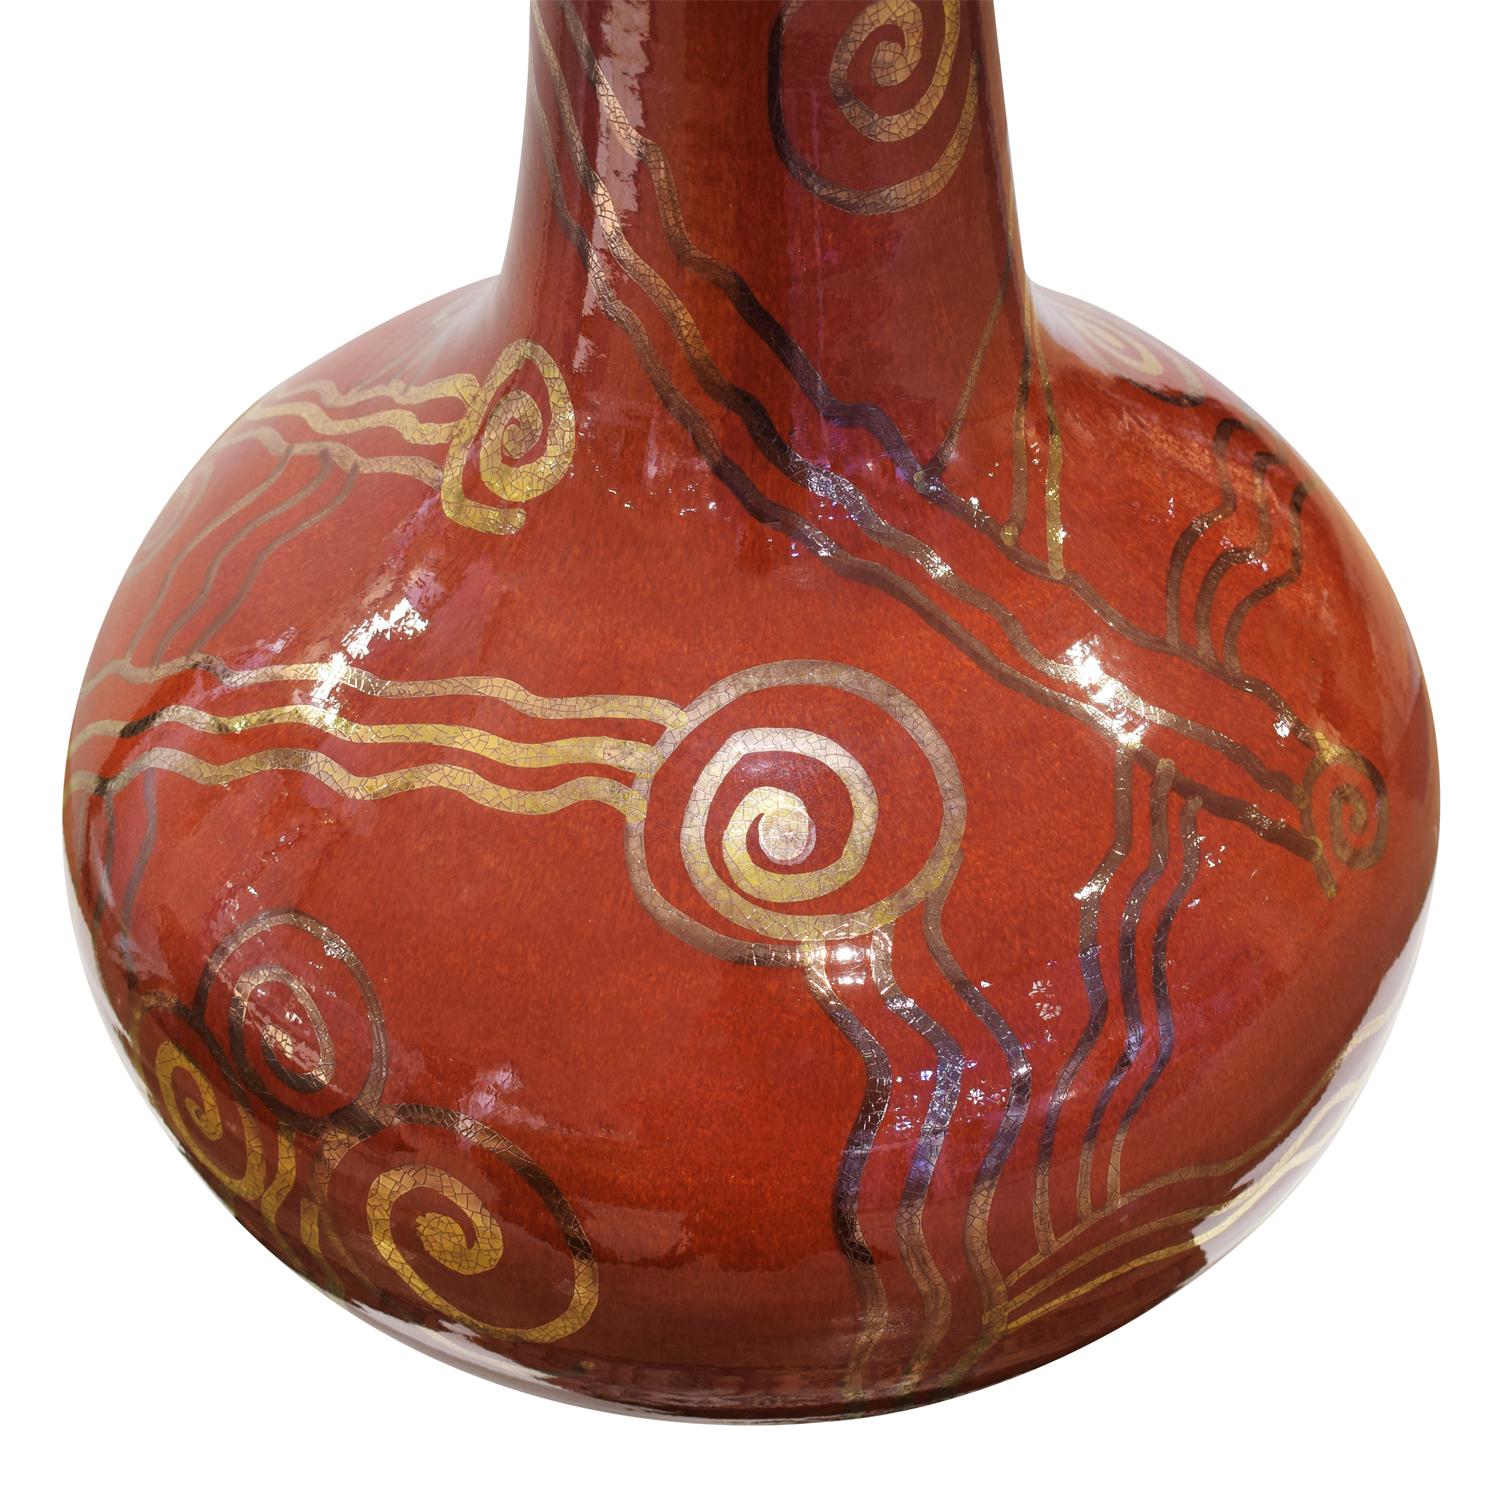 Hand-Crafted Gary McCloy Large Hand-Thrown Ceramic Vase 1970s 'Signed'